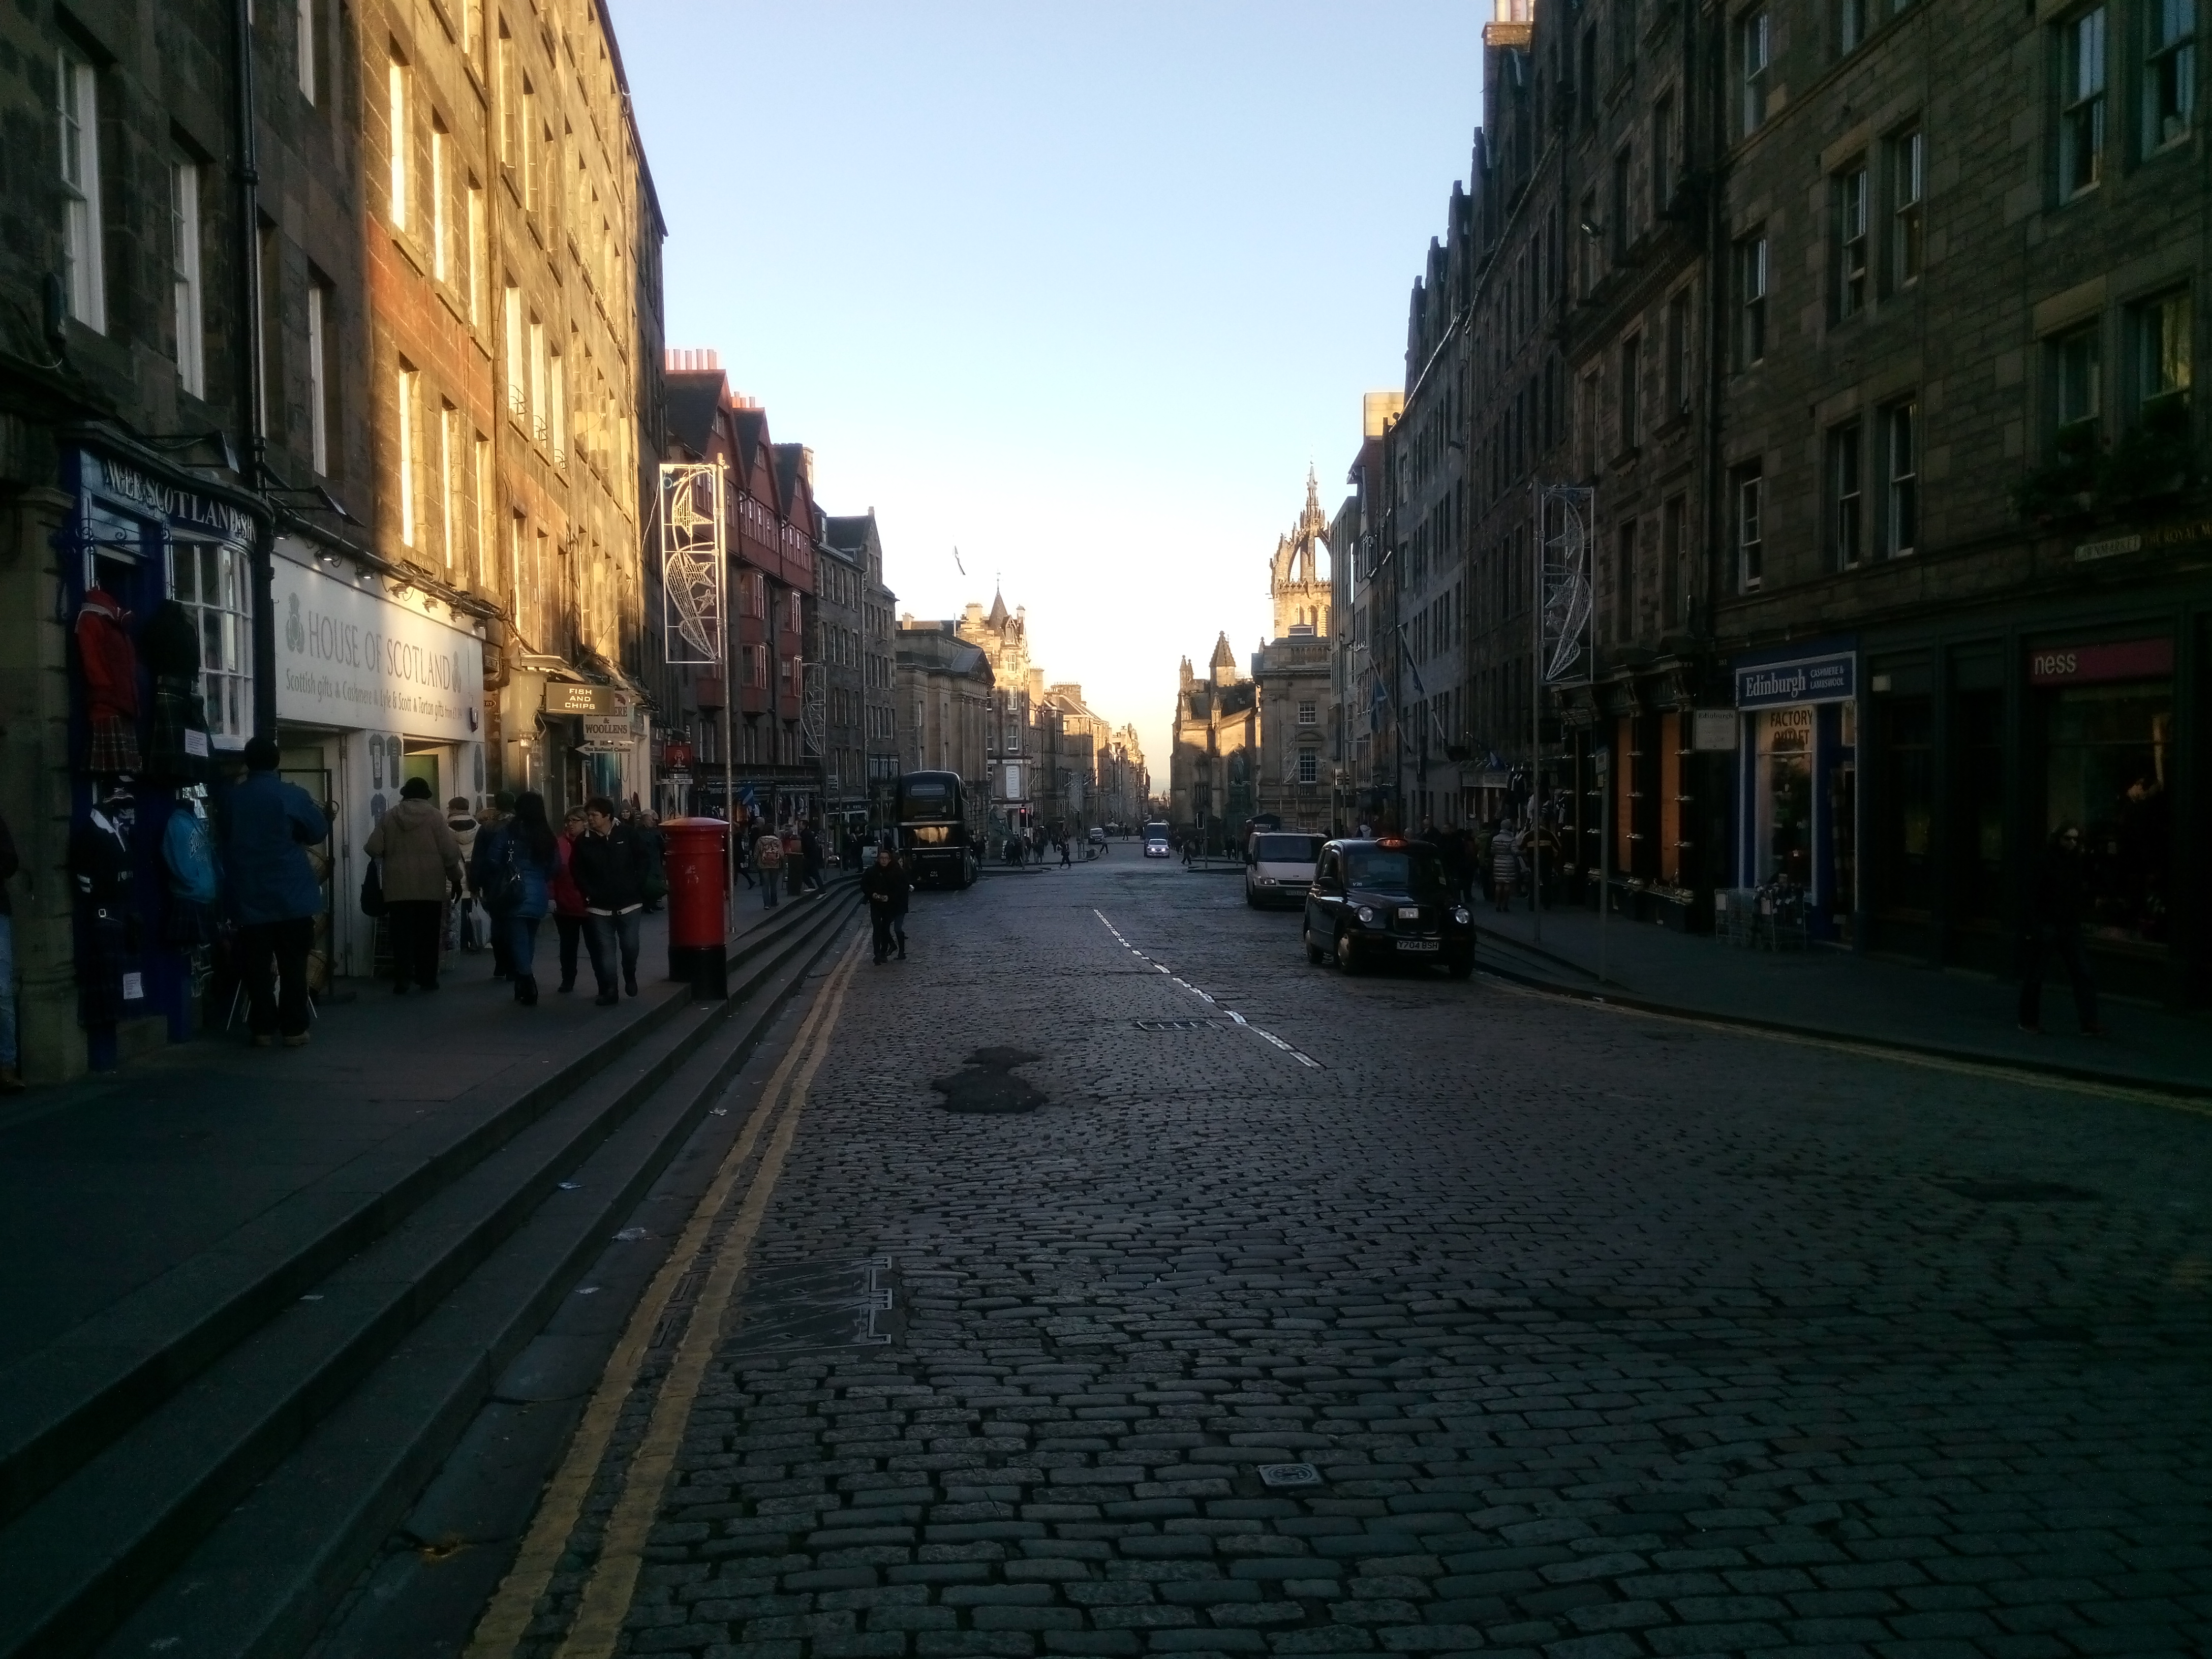 The Royal Mile at Lawnmarket